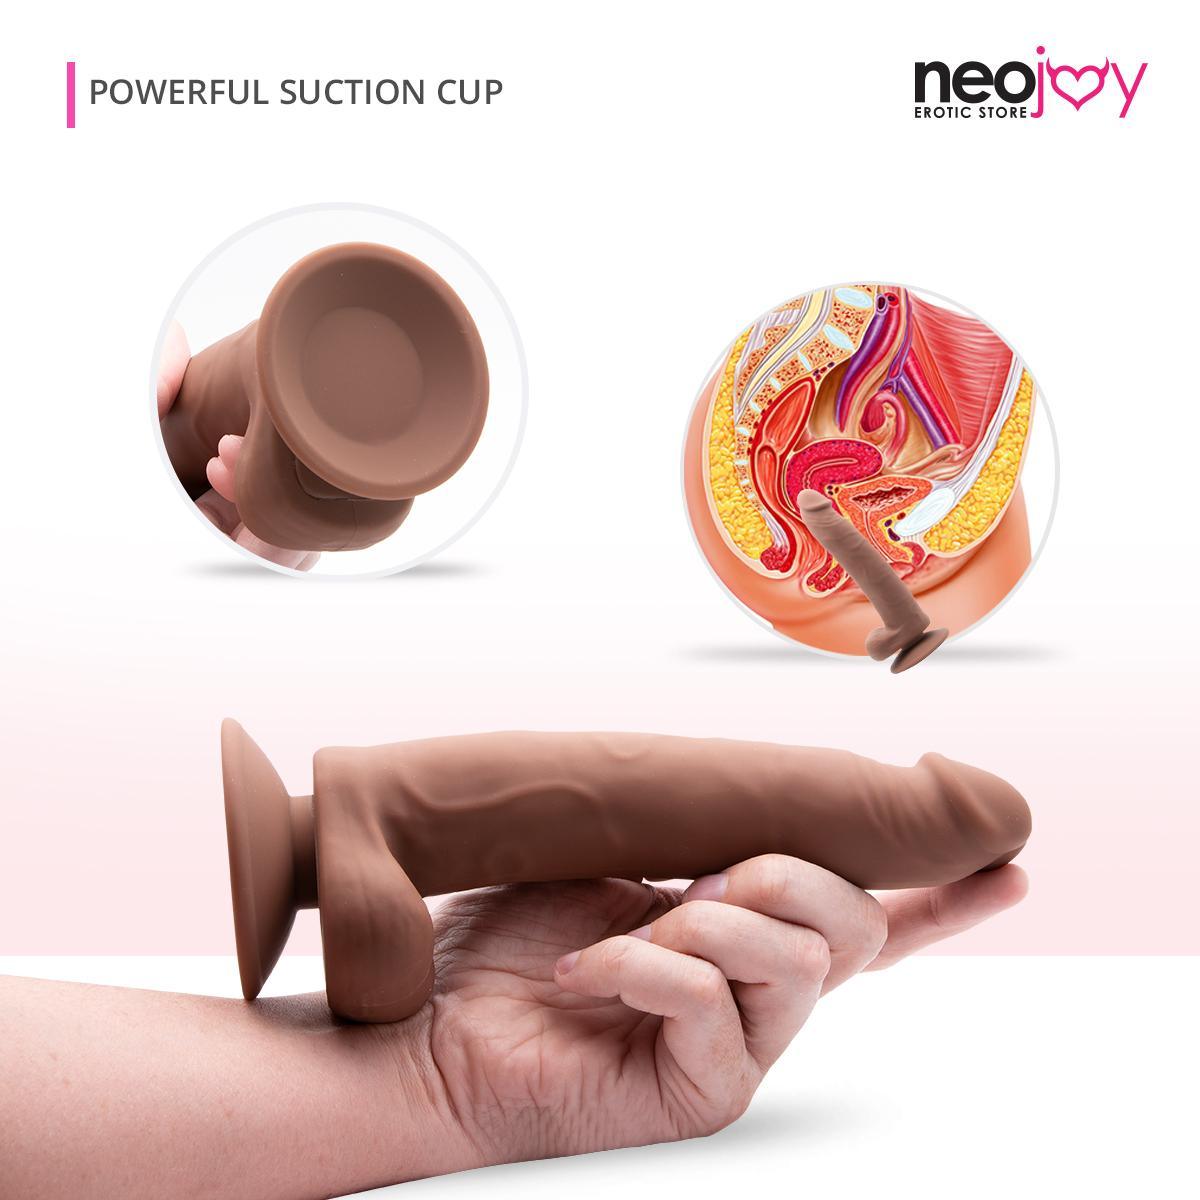 Suction Cup Bigshot Realistic Dildo | Silicon Male Sex Toy | Neojoy - Material